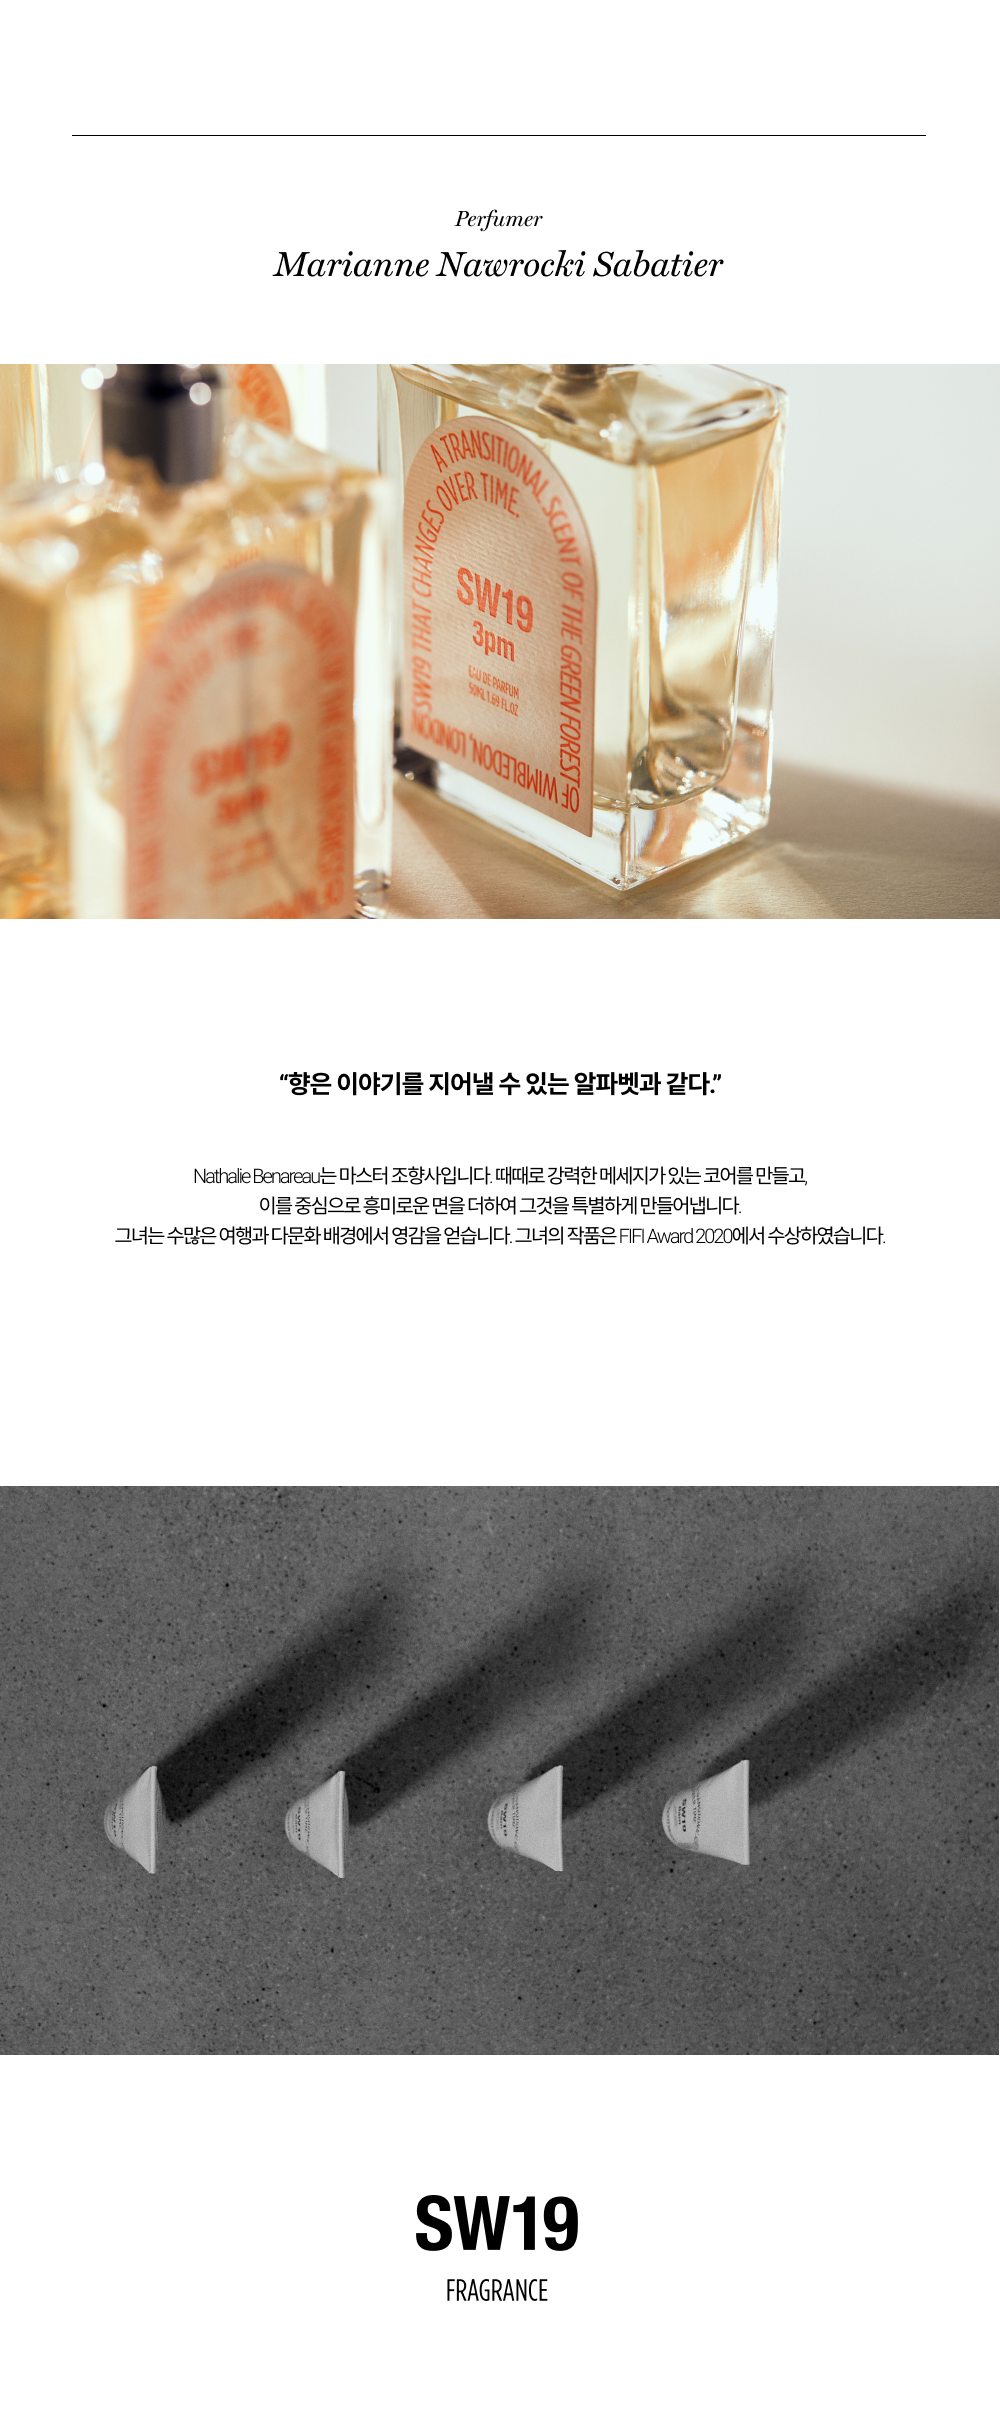 3PM%20handcream_page_4.png